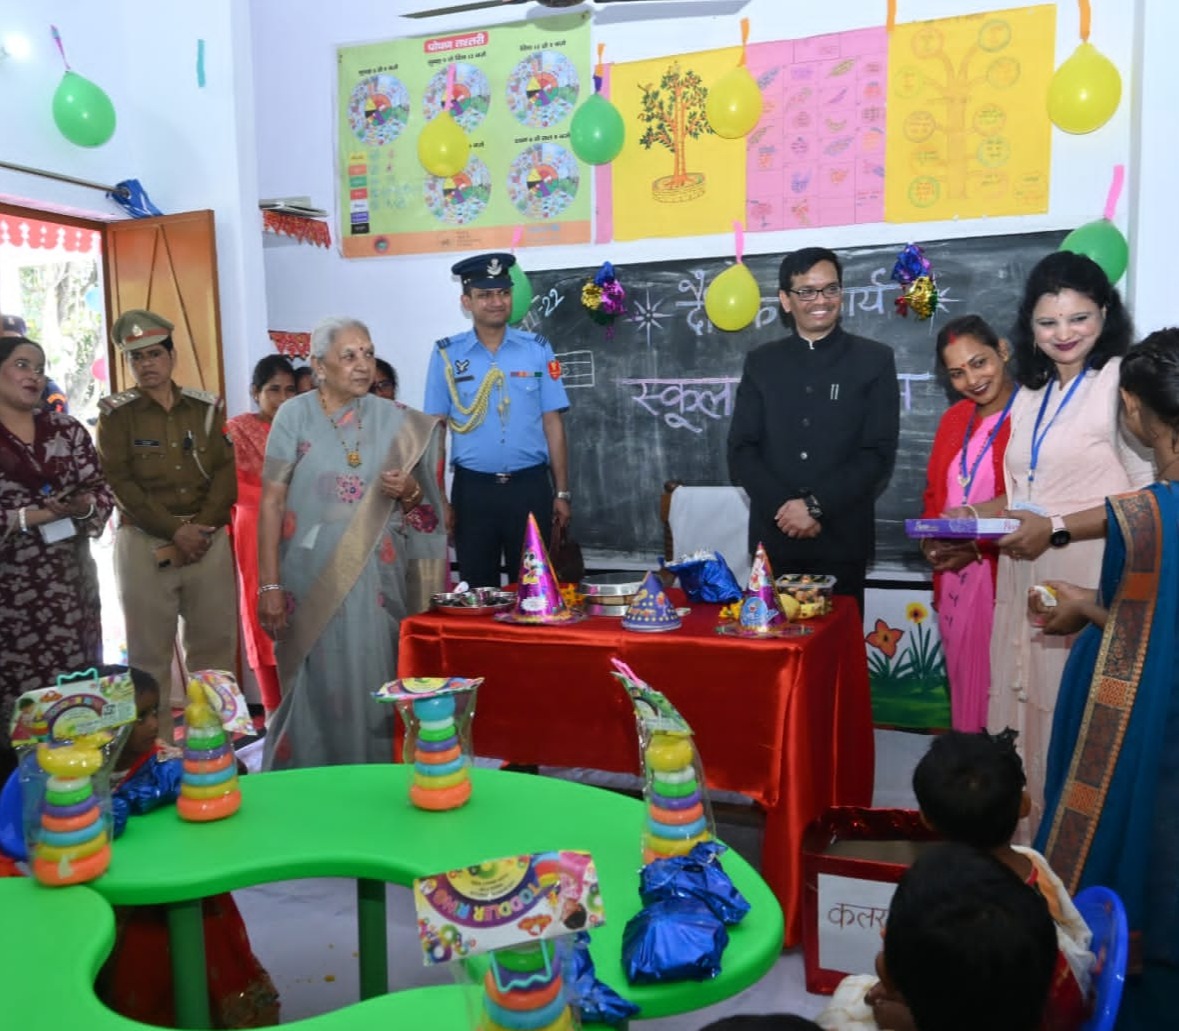 Governor visits villages, Anganwadi centers and S.S.B. outpost in Pilibhit.